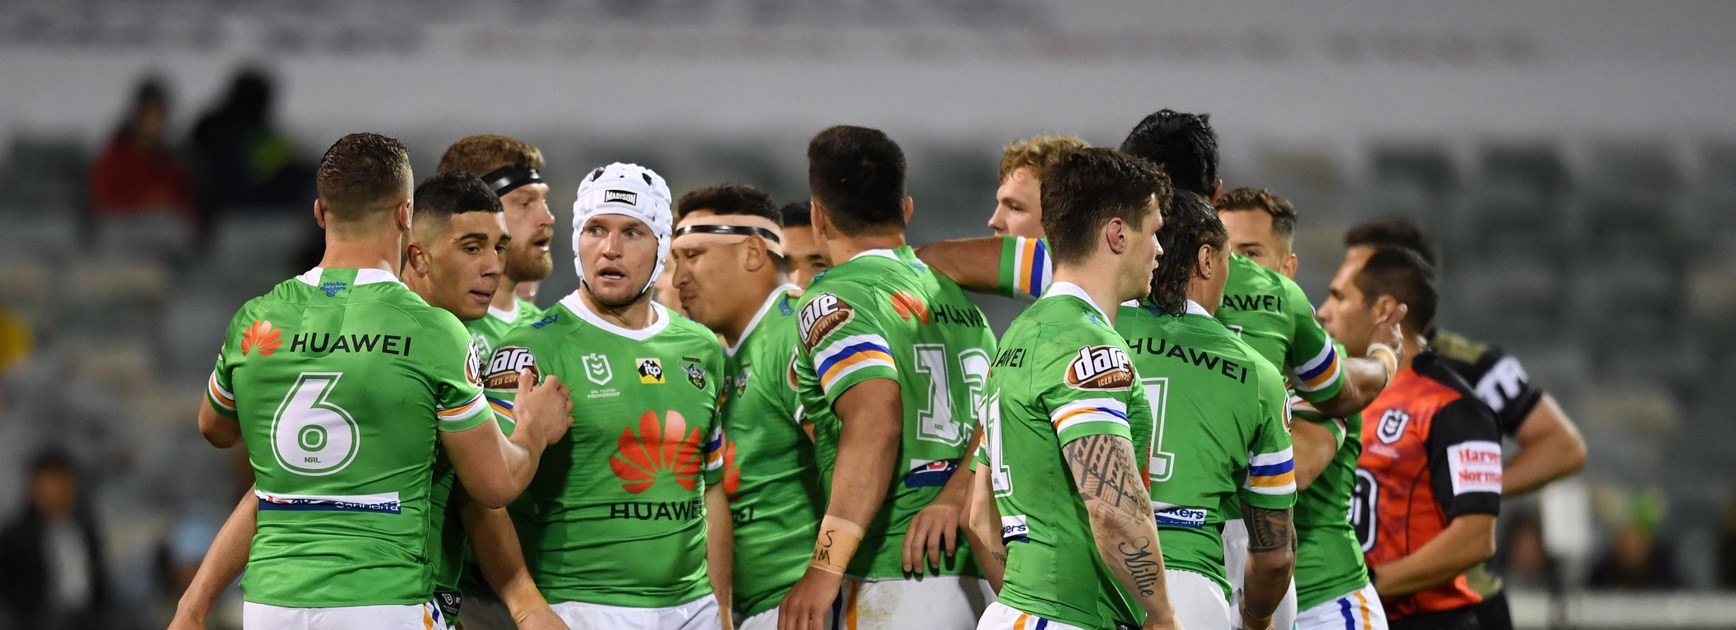 PM offers cautious support for NRL's return bid